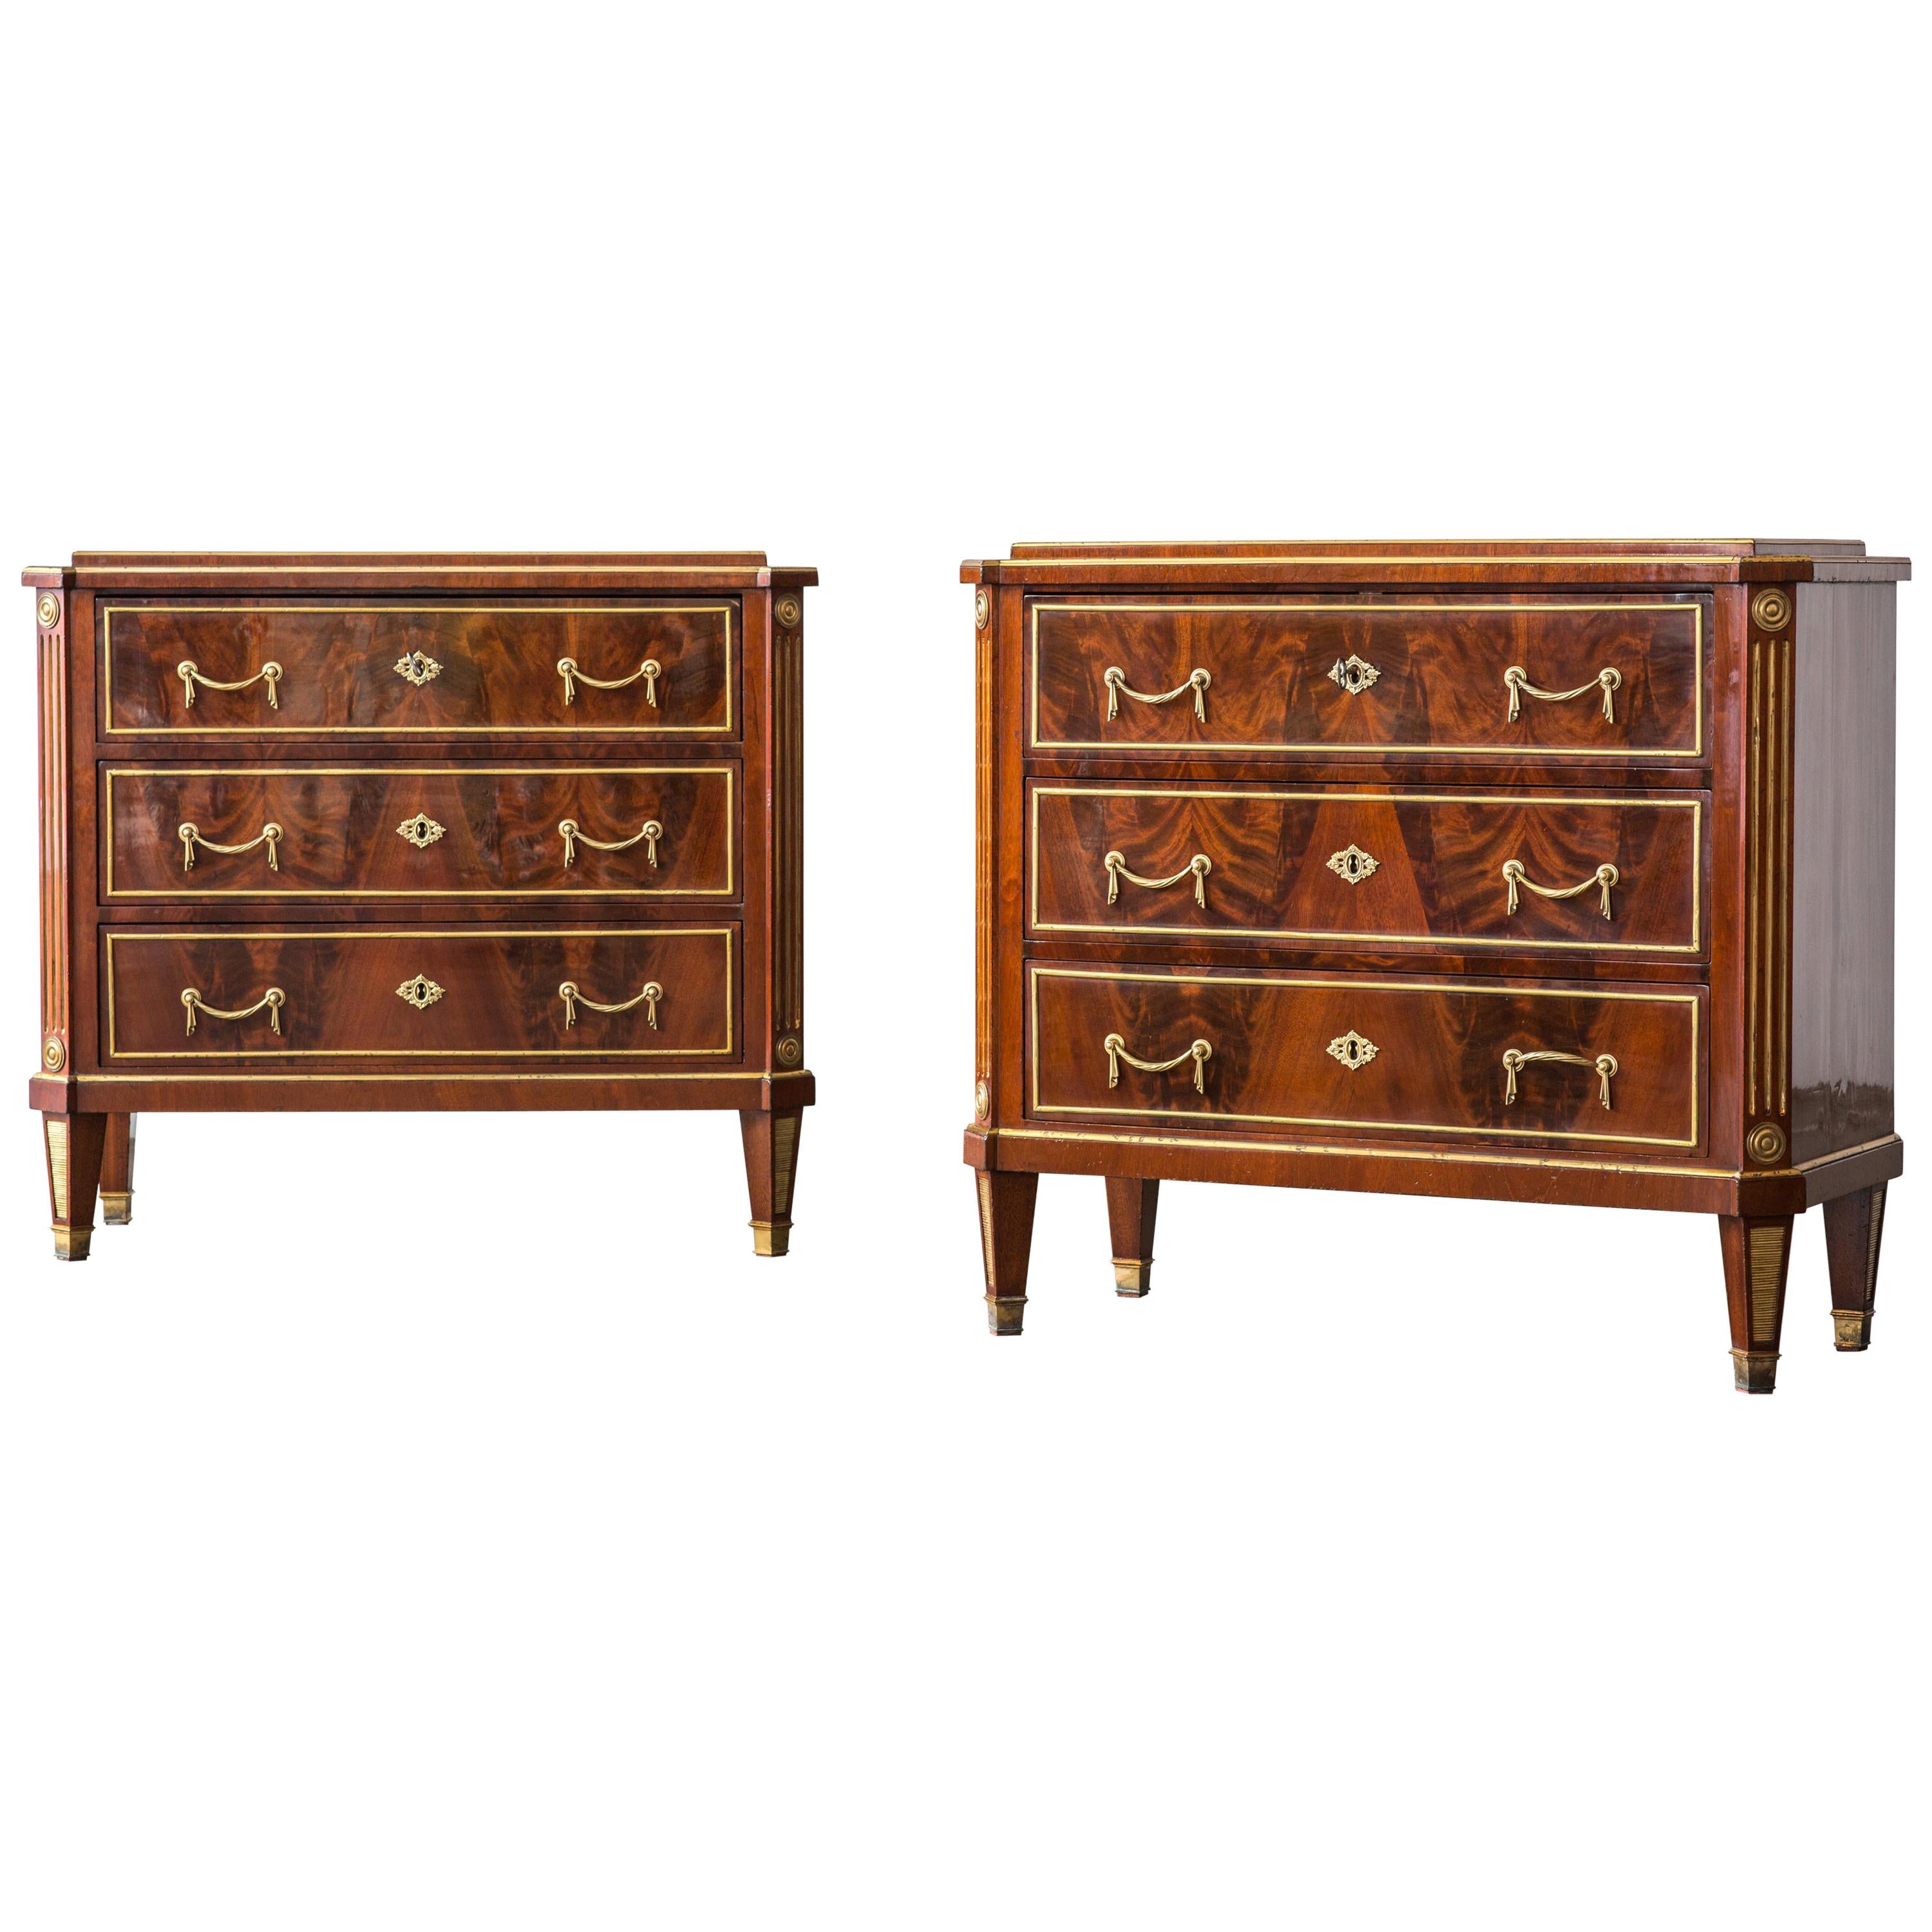 Antique Pair of Neoclassical Mahogany Louis XVI Chests from Russia, 19th Century